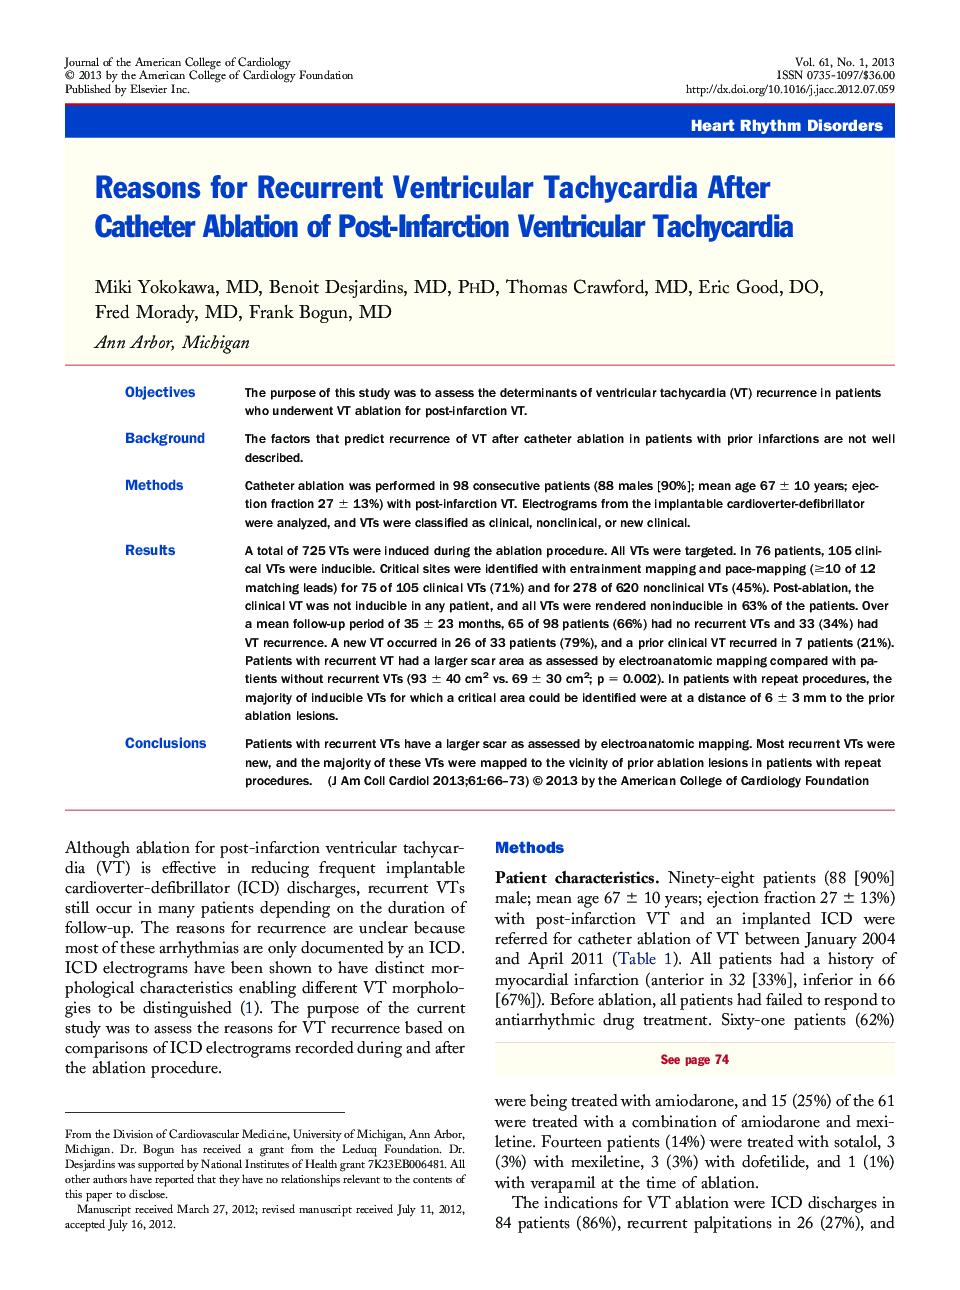 Reasons for Recurrent Ventricular Tachycardia After Catheter Ablation of Post-Infarction Ventricular Tachycardia 